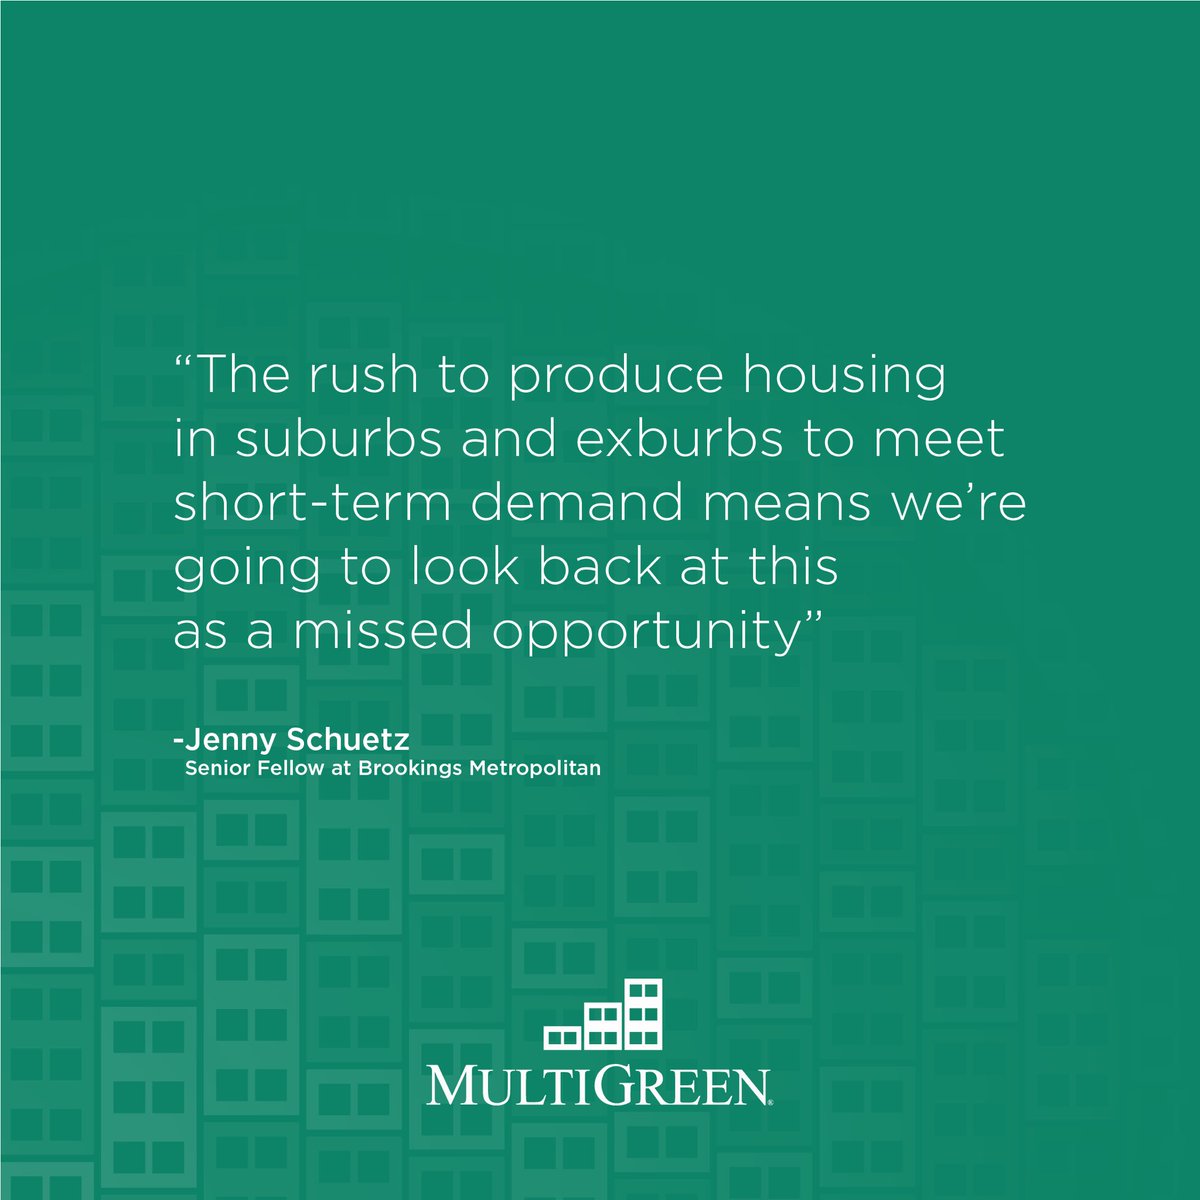 “The rush to produce housing in suburbs and exburbs to meet short-term demand means we’re going to look back at this as a missed opportunity.”

-Jenny Schuetz 

#HousingCrisis #ThinkMultiGreen https://t.co/vYlsT6jnwE